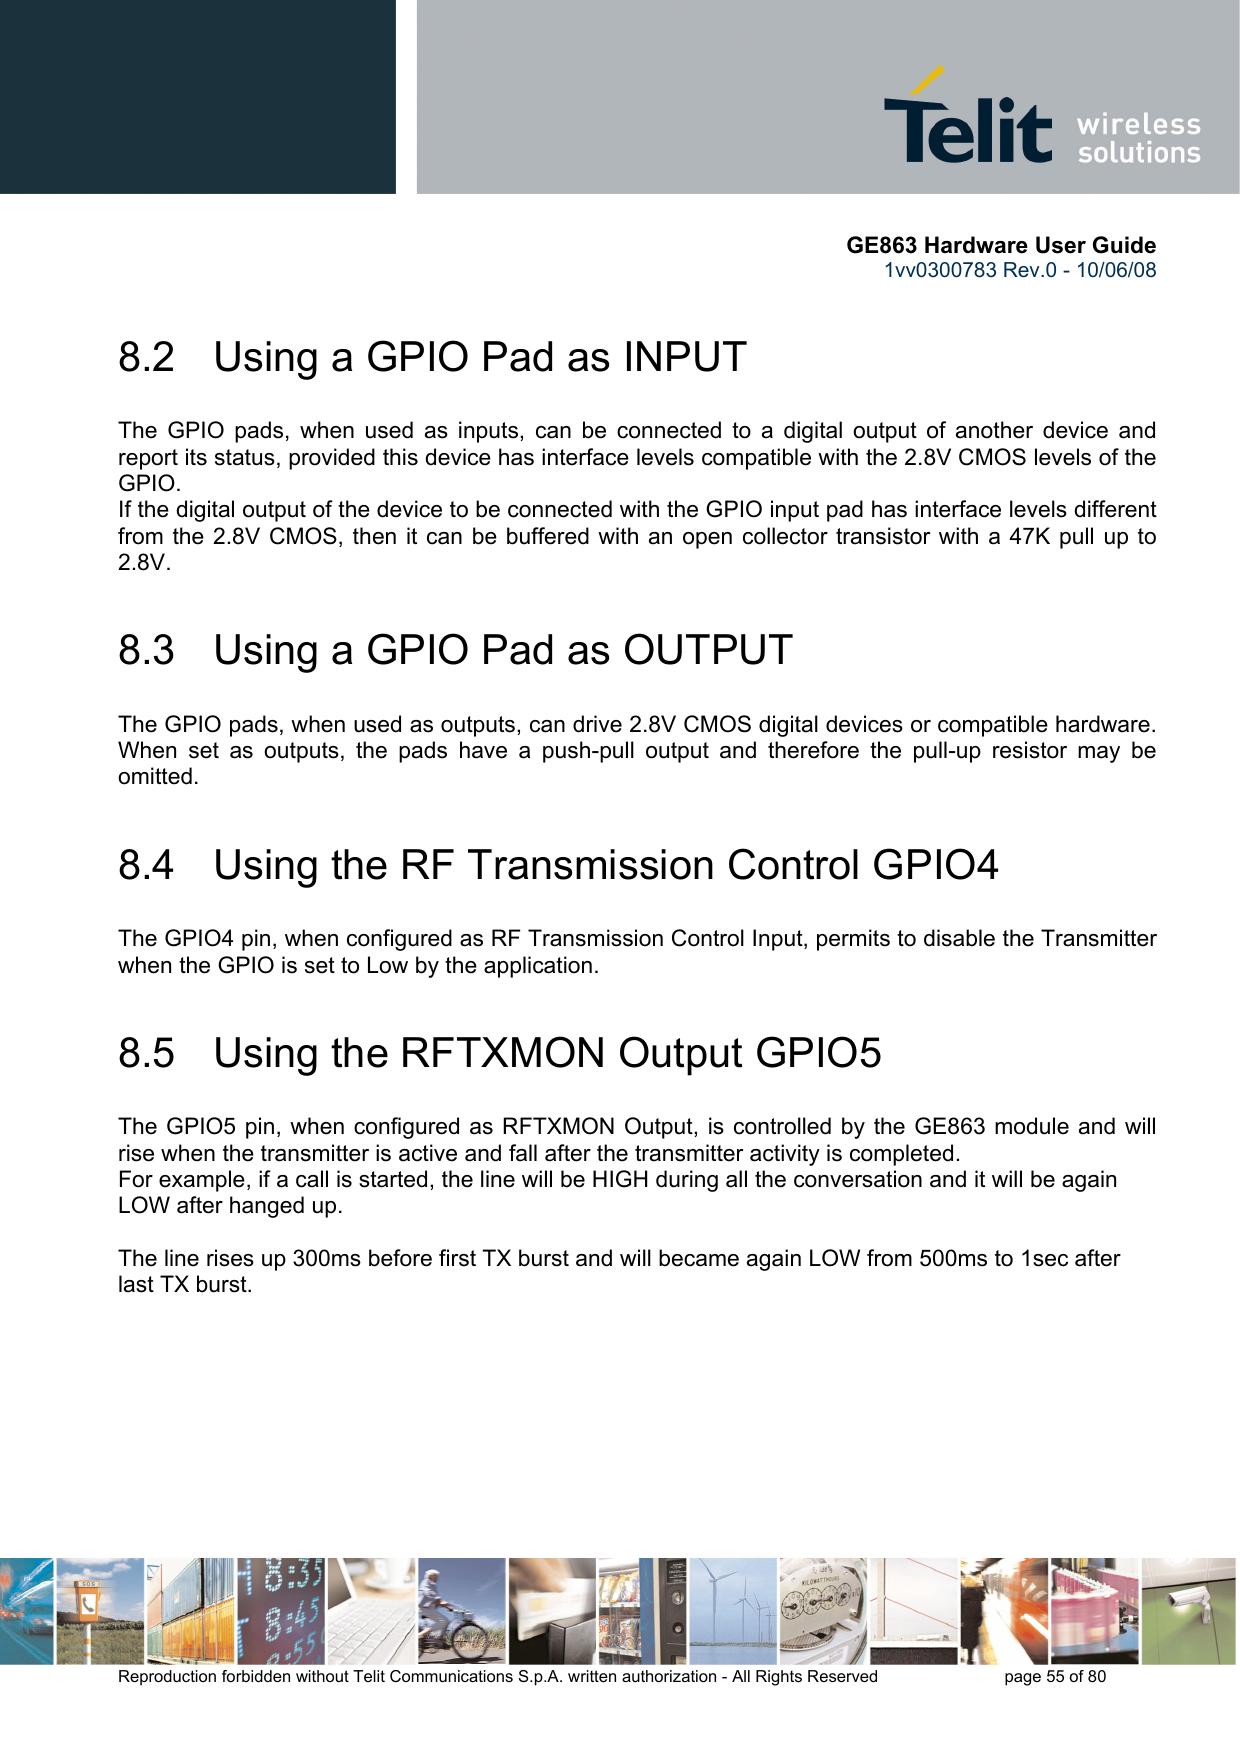       GE863 Hardware User Guide 1vv0300783 Rev.0 - 10/06/08 Reproduction forbidden without Telit Communications S.p.A. written authorization - All Rights Reserved    page 55 of 80  8.2   Using a GPIO Pad as INPUT The GPIO pads, when used as inputs, can be connected to a digital output of another device and report its status, provided this device has interface levels compatible with the 2.8V CMOS levels of the GPIO.  If the digital output of the device to be connected with the GPIO input pad has interface levels different from the 2.8V CMOS, then it can be buffered with an open collector transistor with a 47K pull up to 2.8V. 8.3   Using a GPIO Pad as OUTPUT The GPIO pads, when used as outputs, can drive 2.8V CMOS digital devices or compatible hardware. When set as outputs, the pads have a push-pull output and therefore the pull-up resistor may be omitted. 8.4   Using the RF Transmission Control GPIO4 The GPIO4 pin, when configured as RF Transmission Control Input, permits to disable the Transmitter when the GPIO is set to Low by the application. 8.5   Using the RFTXMON Output GPIO5 The GPIO5 pin, when configured as RFTXMON Output, is controlled by the GE863 module and will rise when the transmitter is active and fall after the transmitter activity is completed. For example, if a call is started, the line will be HIGH during all the conversation and it will be again LOW after hanged up.  The line rises up 300ms before first TX burst and will became again LOW from 500ms to 1sec after last TX burst. 